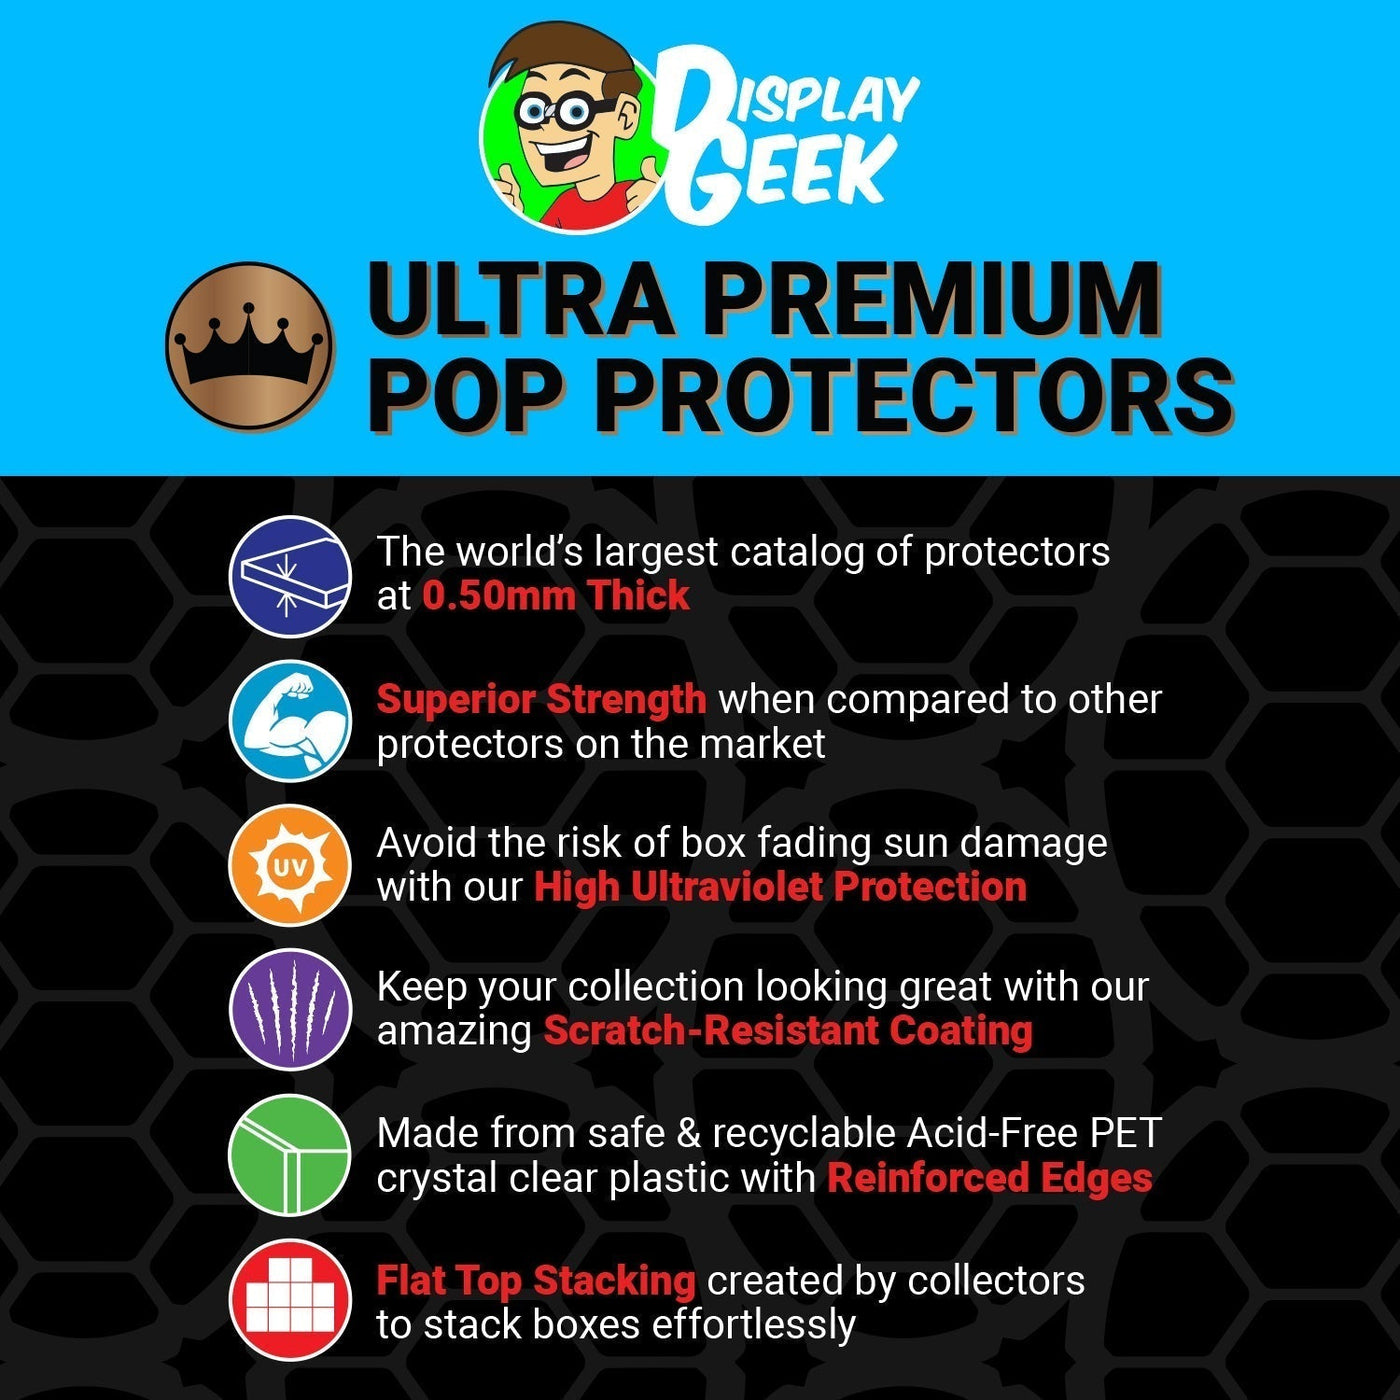 Pop Protector for Hades FunkO's Cereal Box on The Protector Guide App by Display Geek